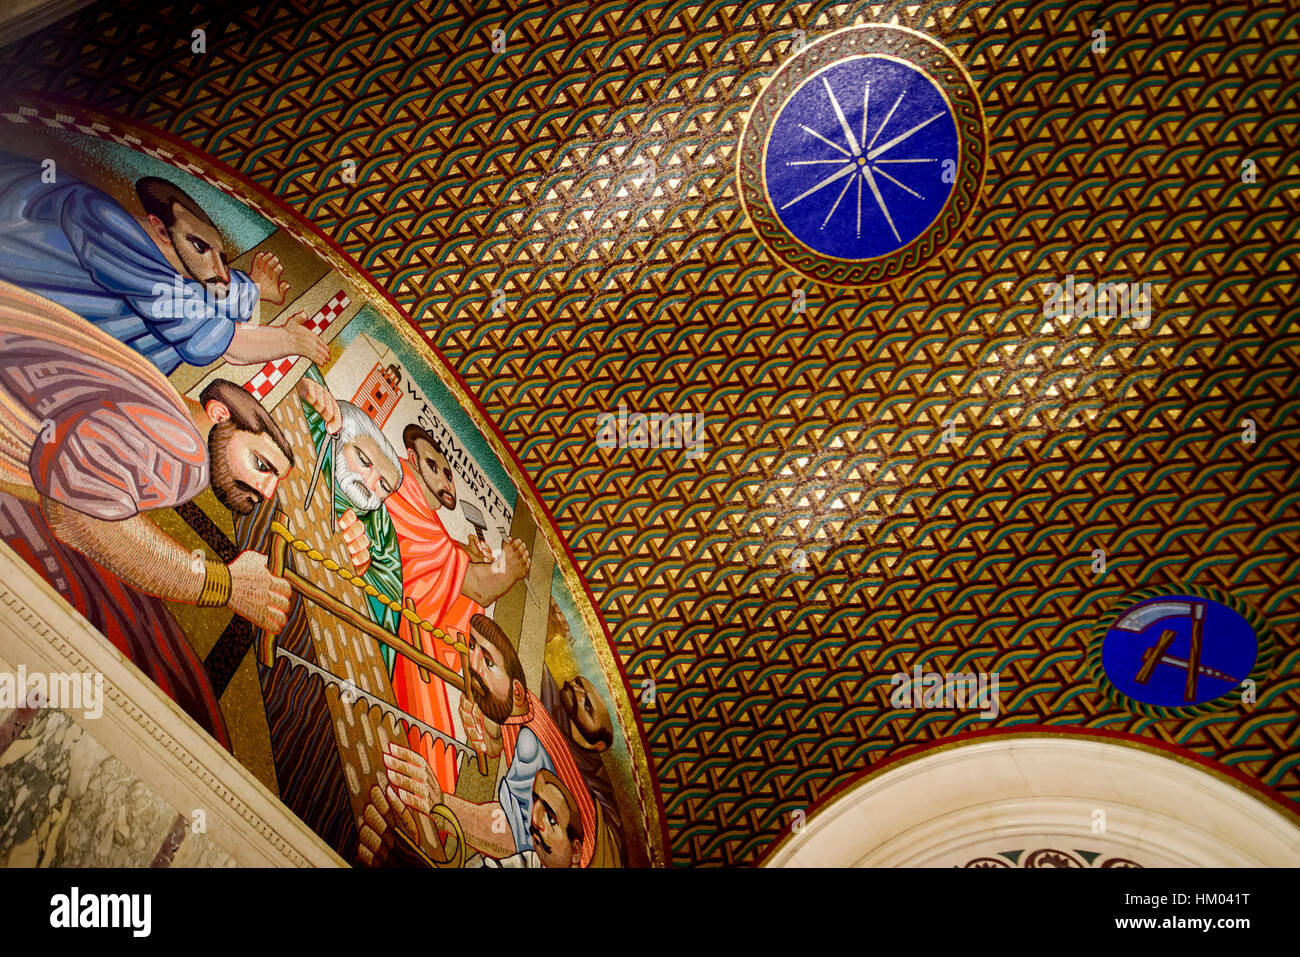 Wall mosaic within the Chapel of St Joseph, Westminster Cathedral, London, United Kingdom Stock Photo